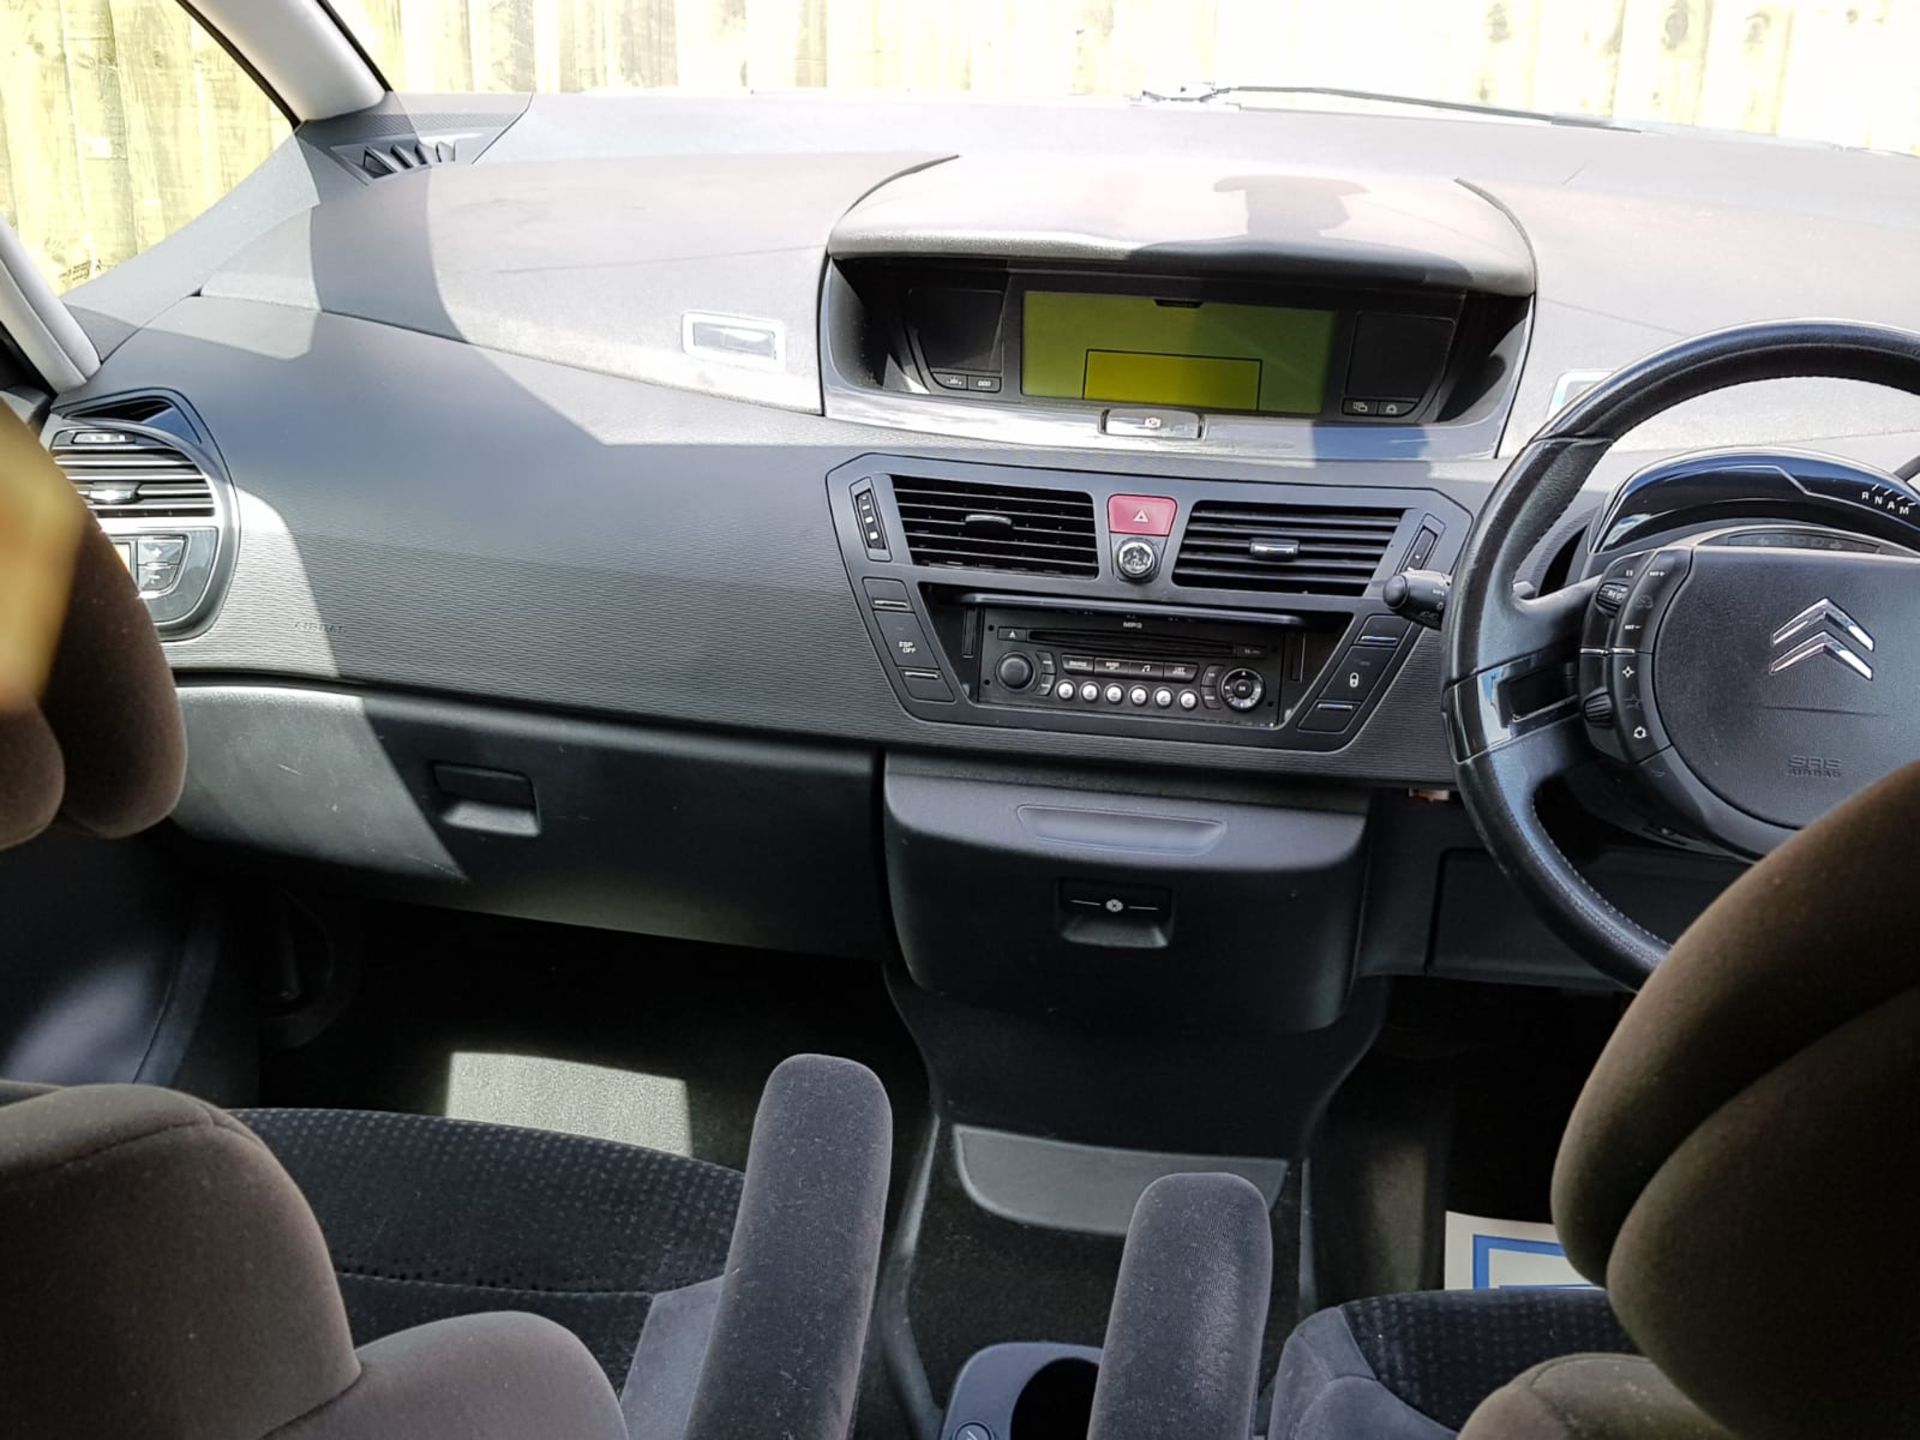 2009 CITROEN C4 PICASSO 7 SEATER EXCL HDI A - Image 9 of 20